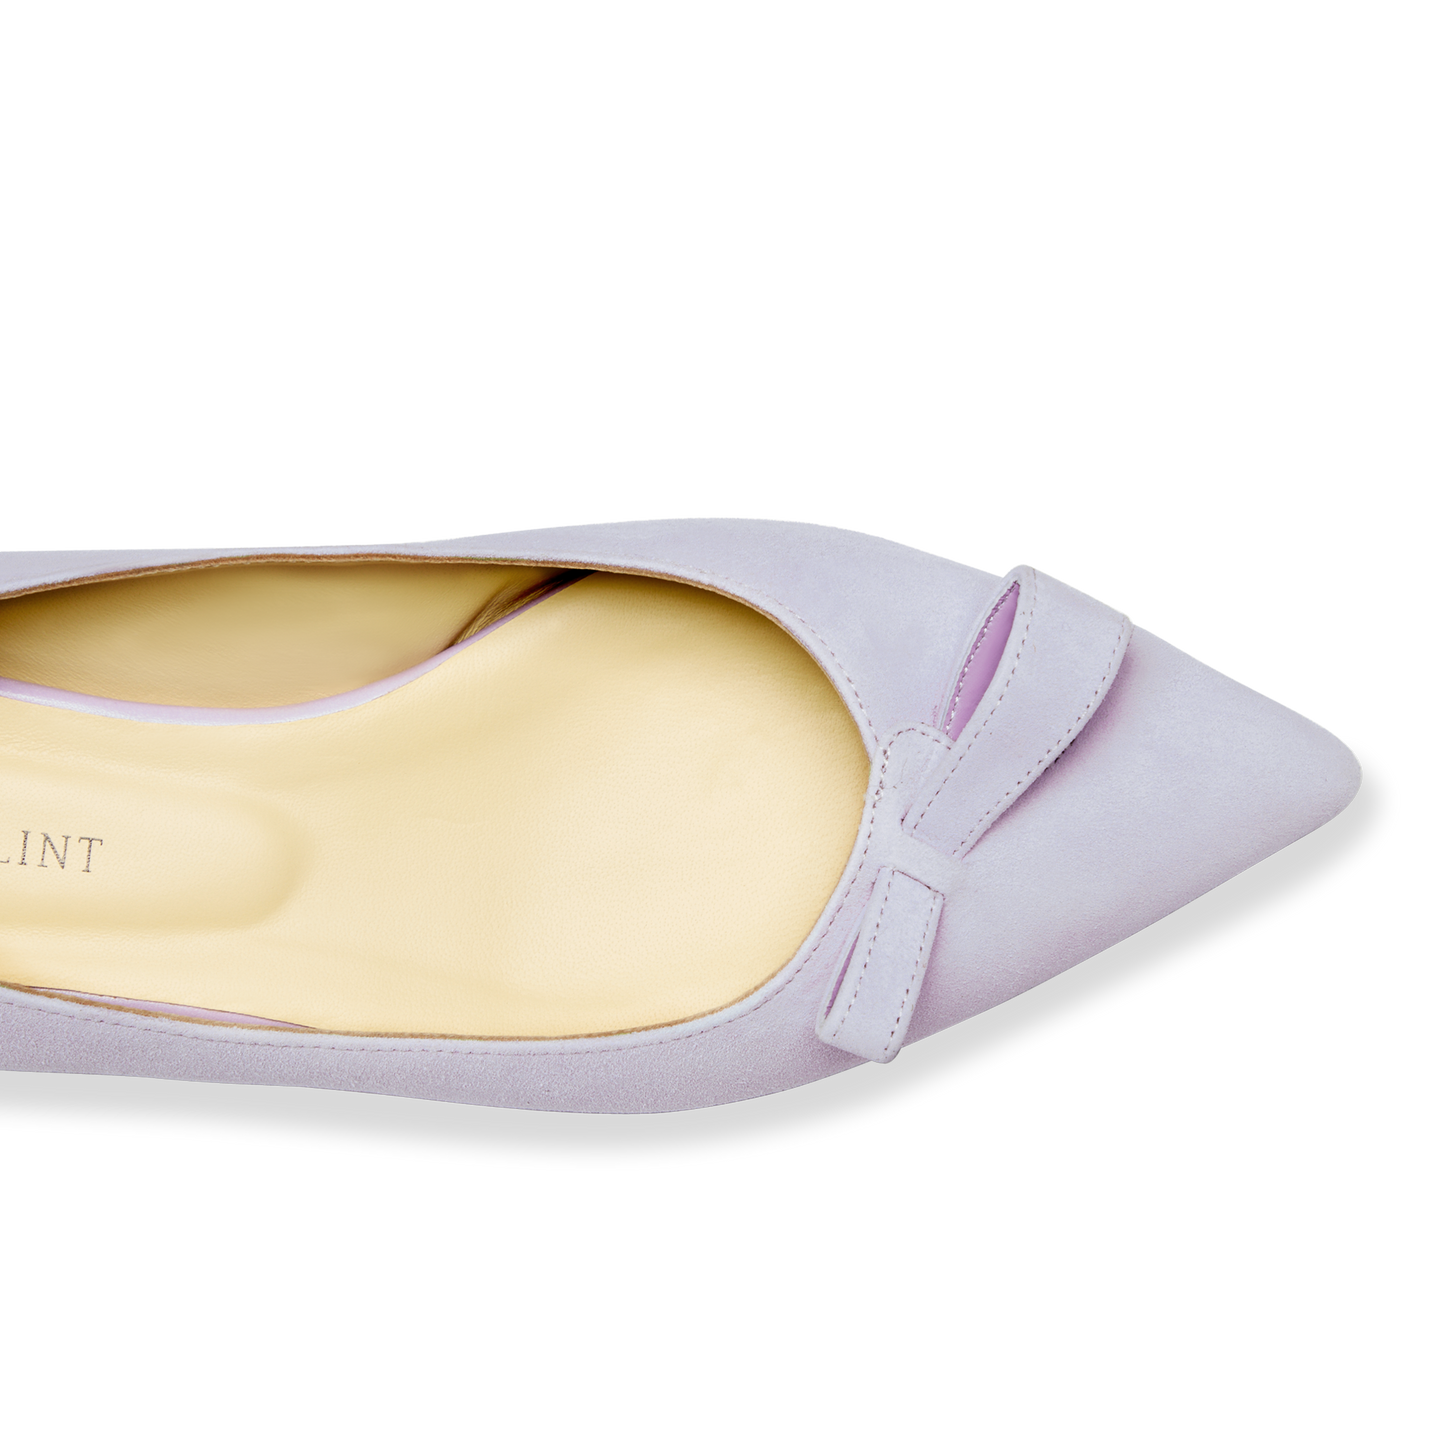 10mm Italian Made Natalie Pointed Toe Flat in Lavender Suede